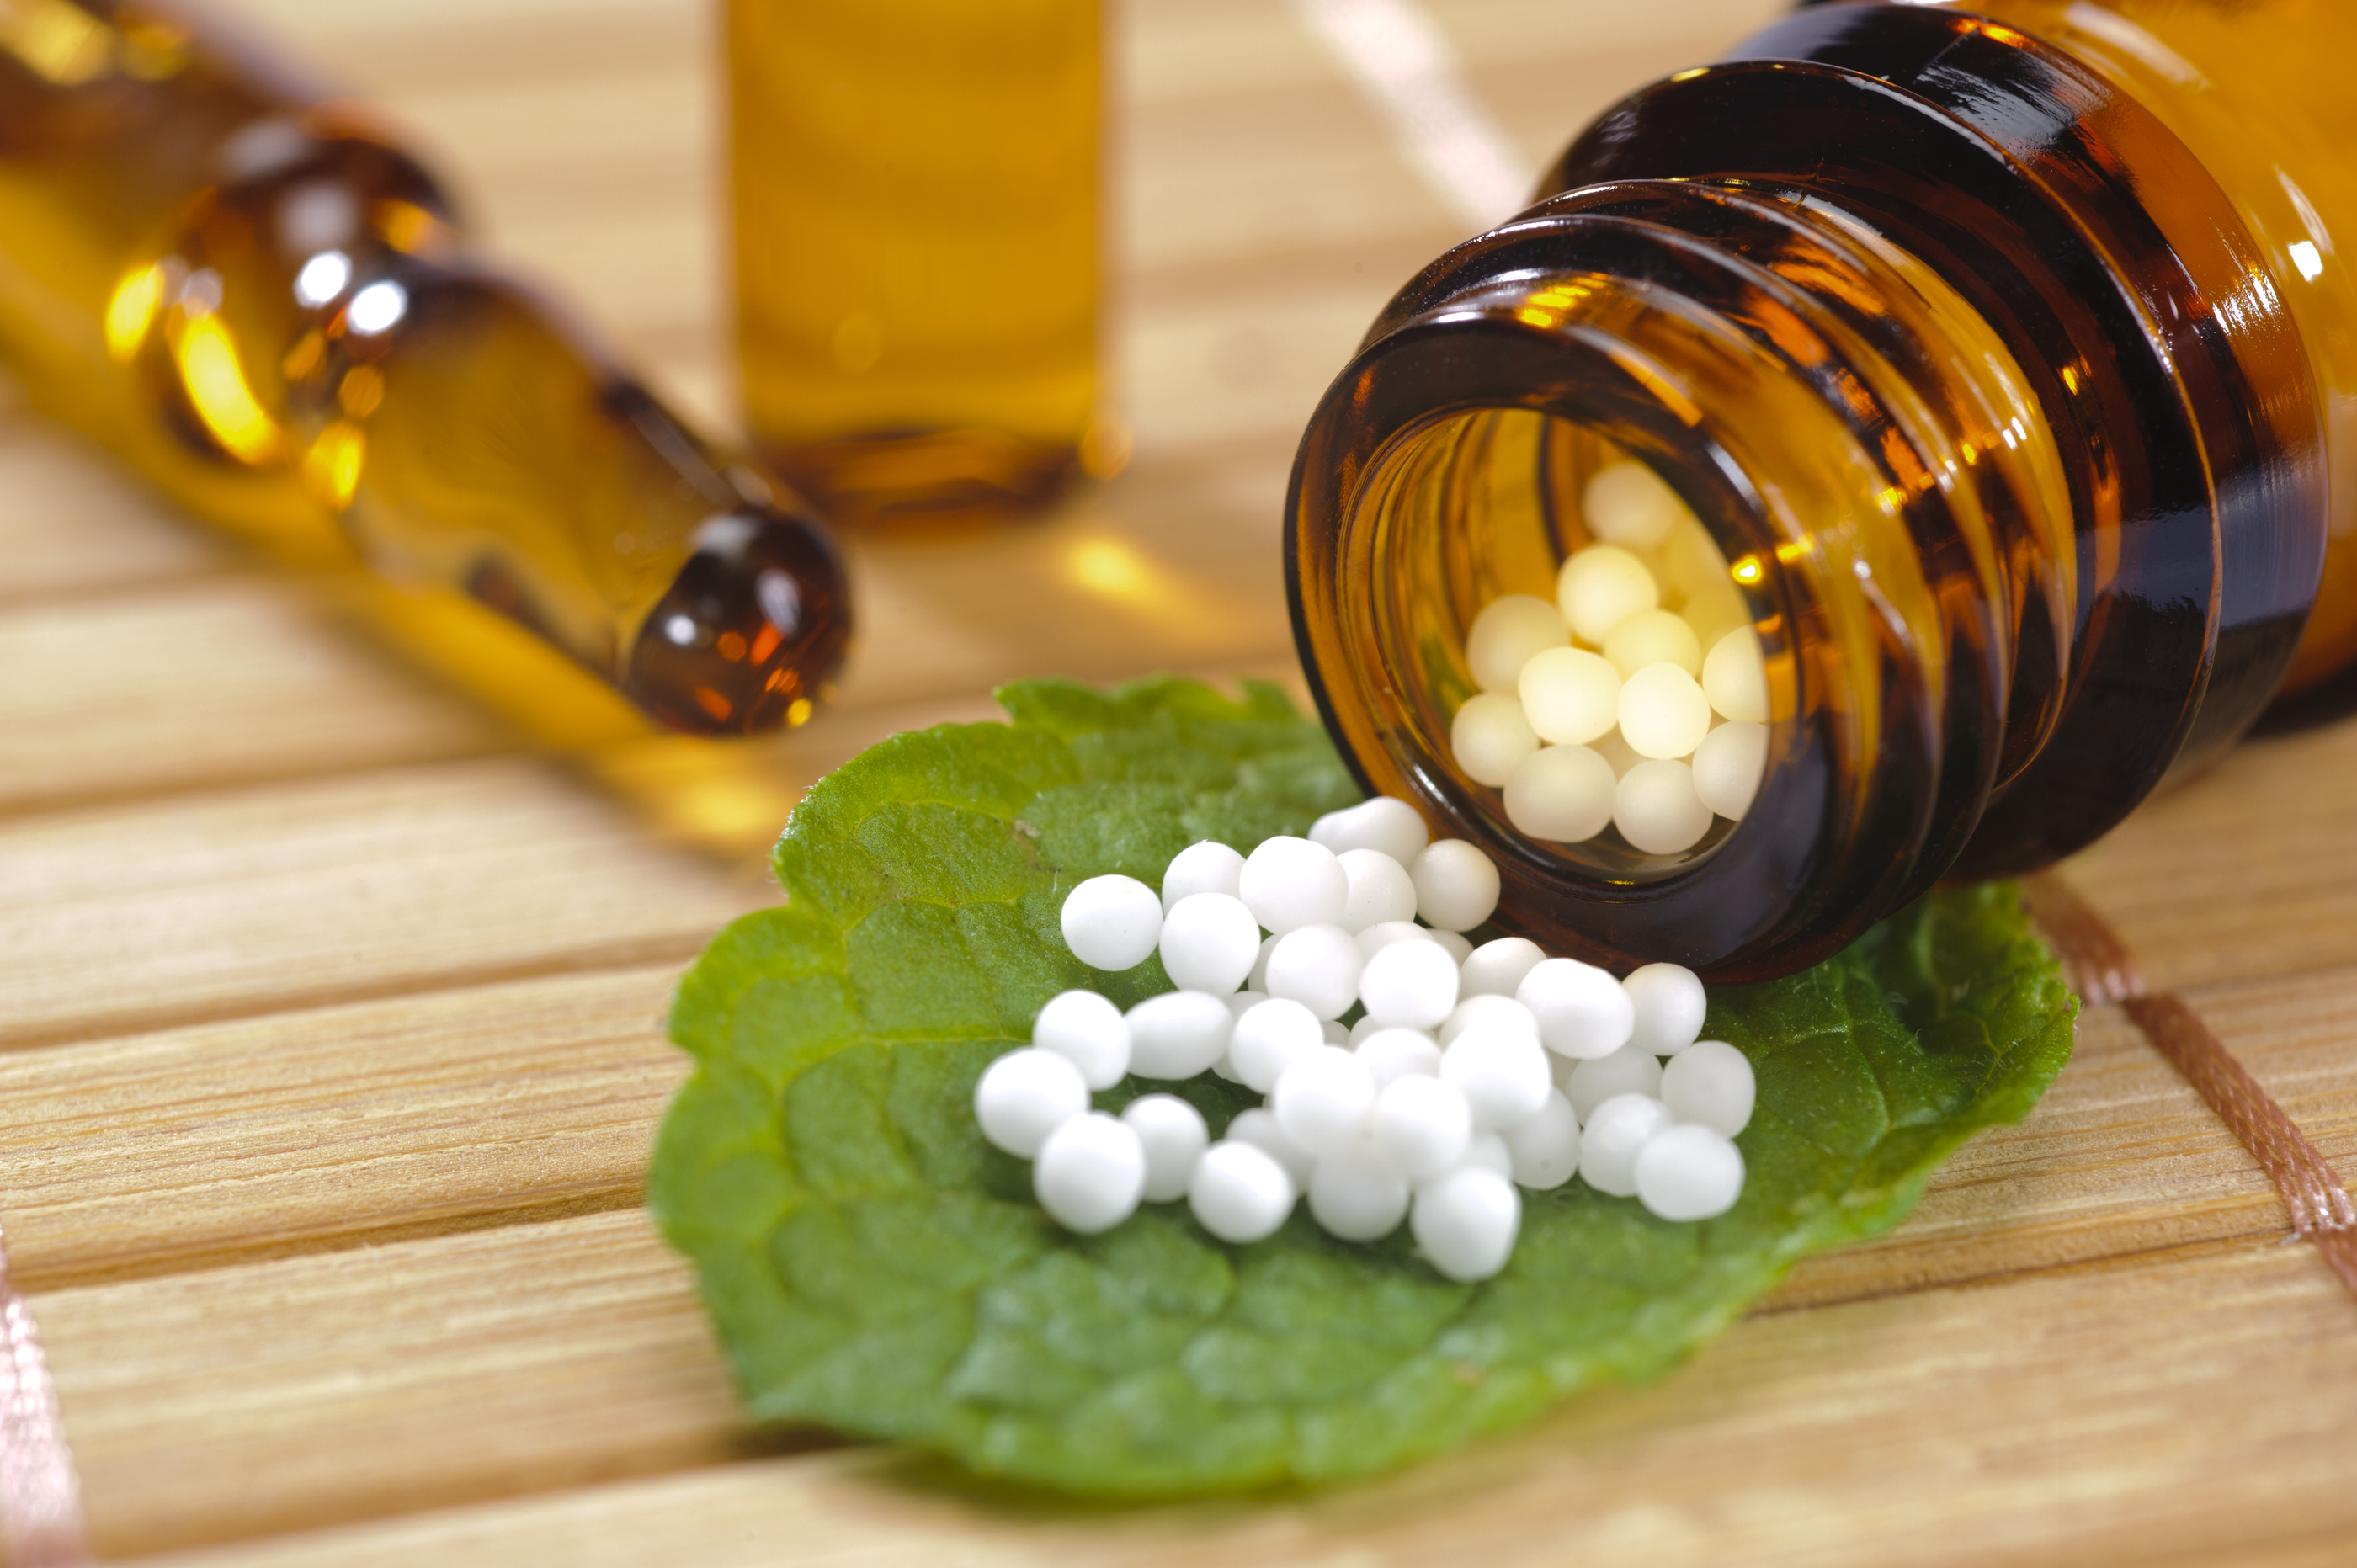 homeopathy-benefits-formulation-risks-and-contraindications